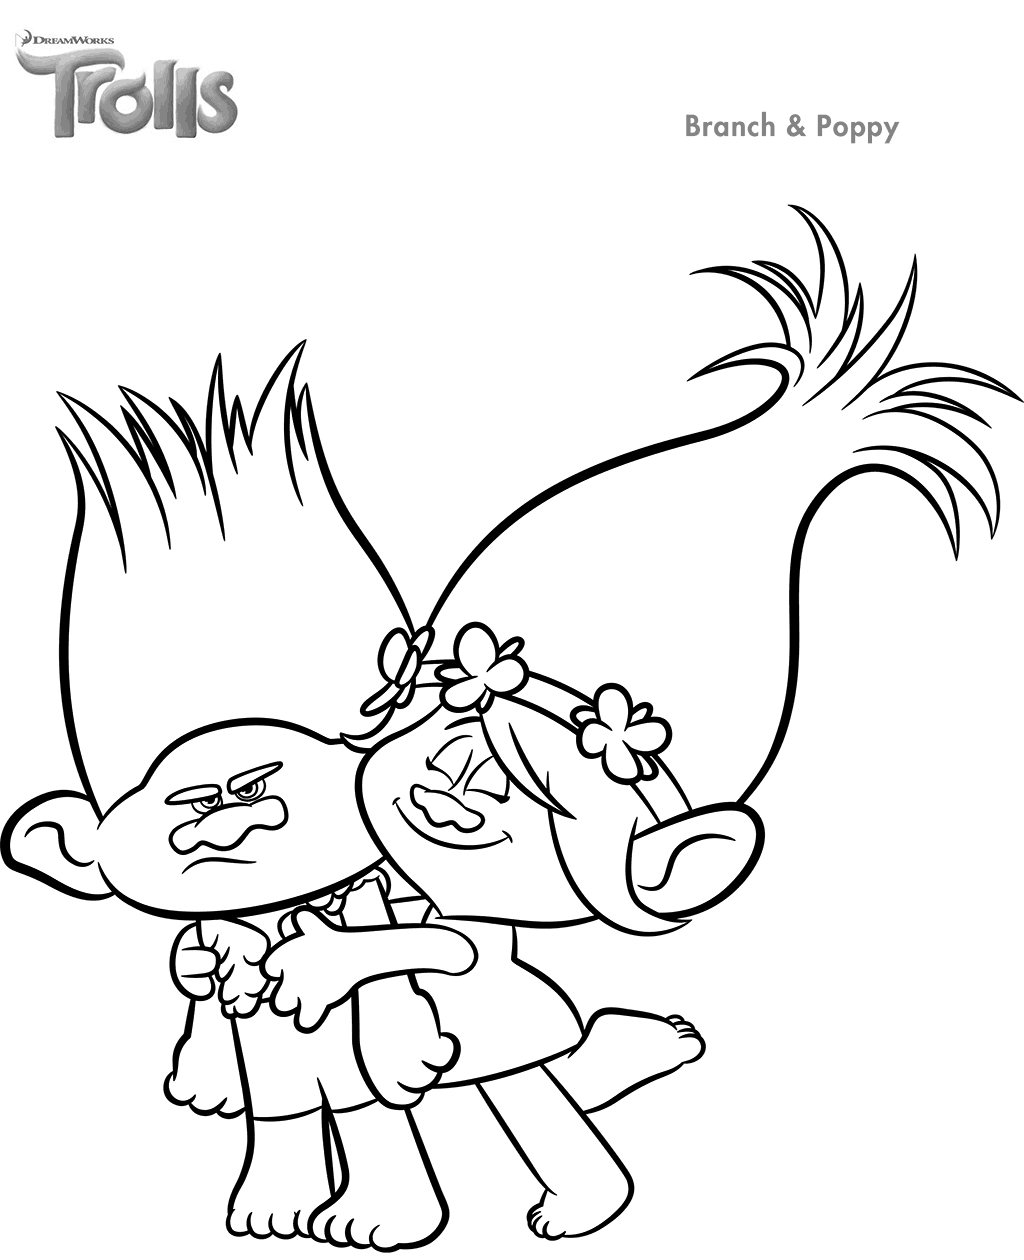 free coloring pages trolls trolls movie coloring pages best coloring pages for kids coloring free pages trolls 